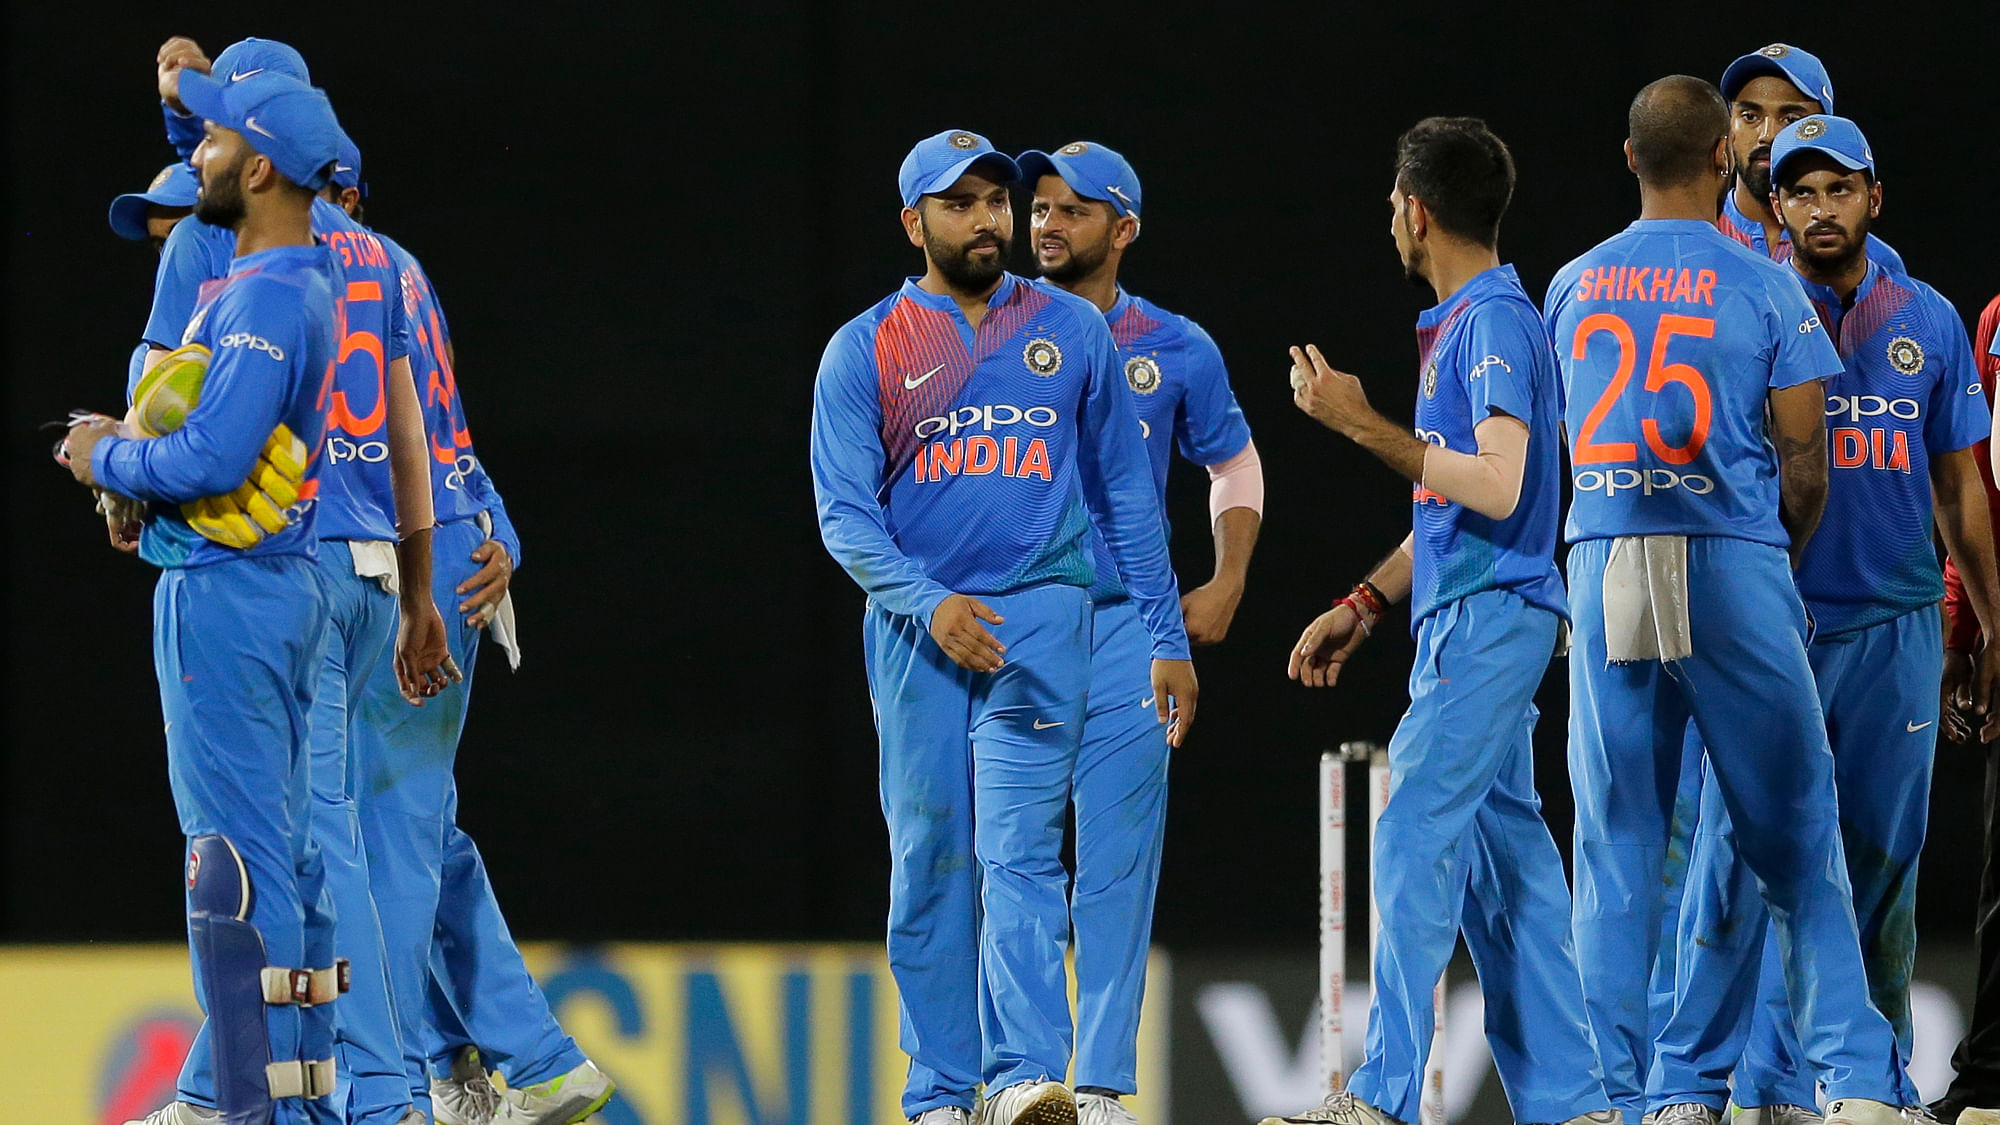 India’s Rohit Sharma, center, leads his team after defeating Bangladesh by 17 runs in their second Twenty20 cricket match in Nidahas triangular series in Colombo, Sri Lanka, Wednesday